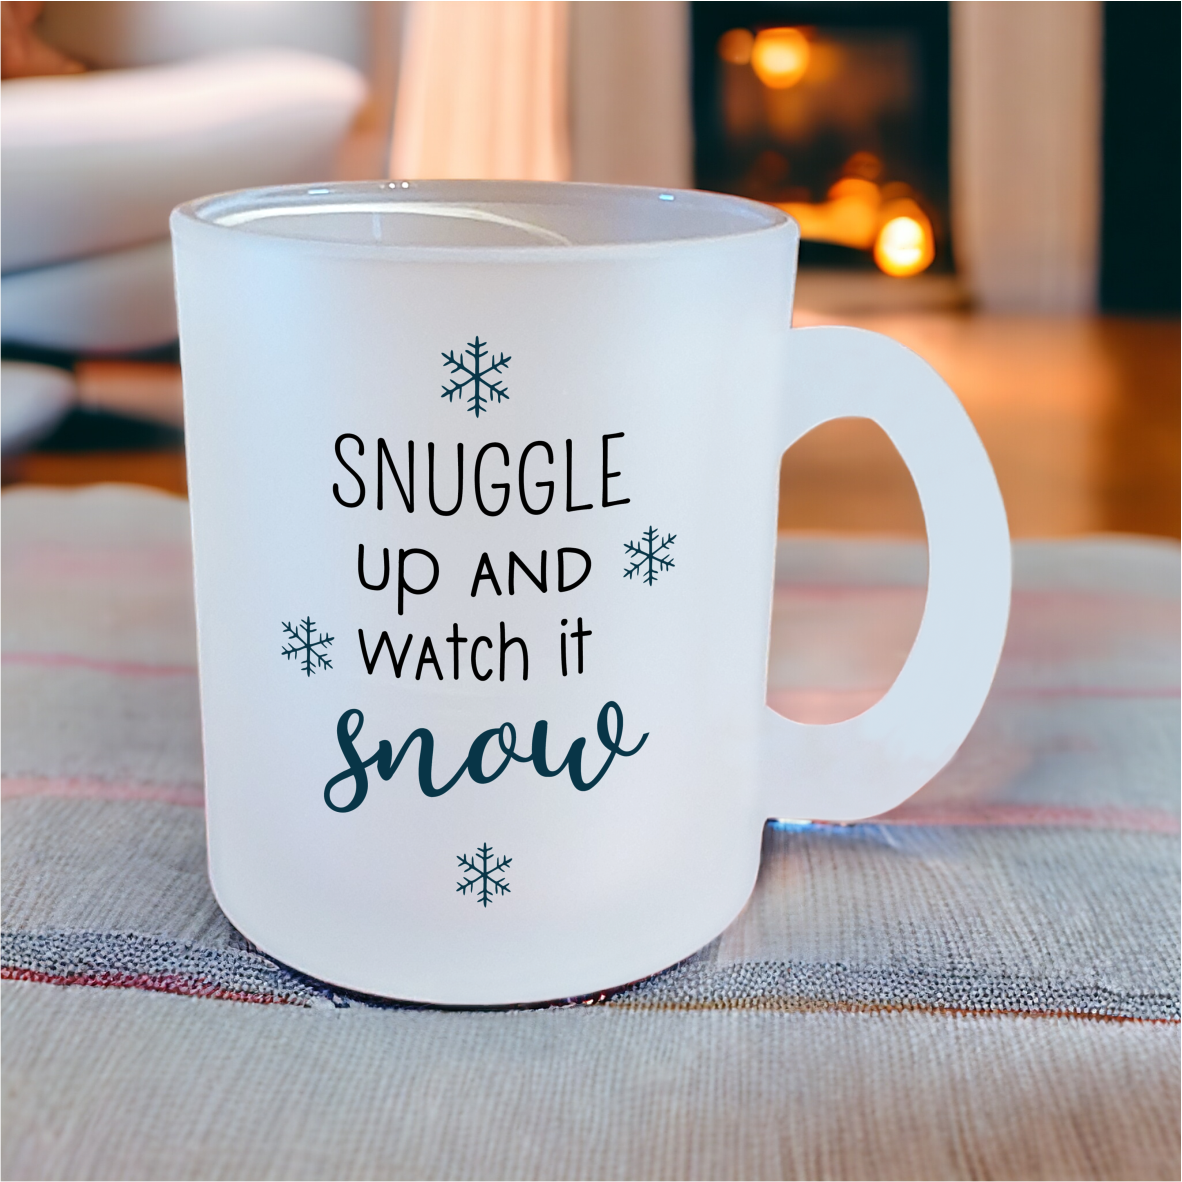 Glastasse "Snuggle up and watch it snow"